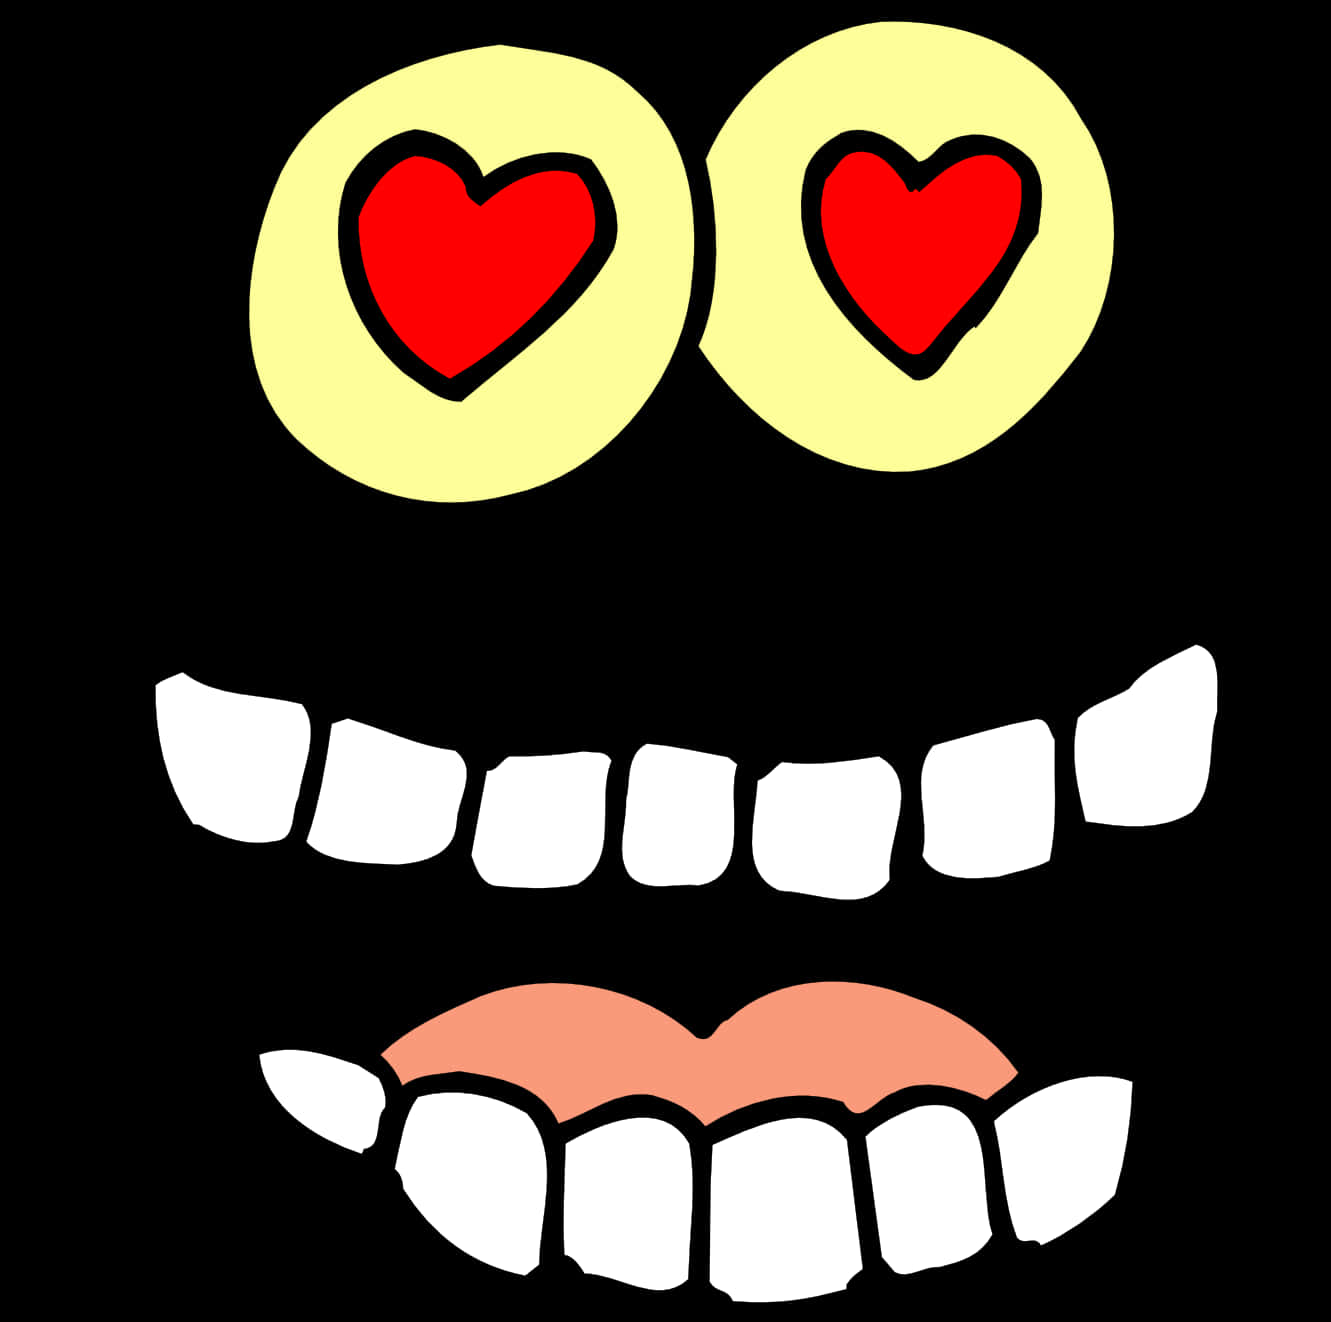 Heart Eyed Smiley Face Graphic PNG image